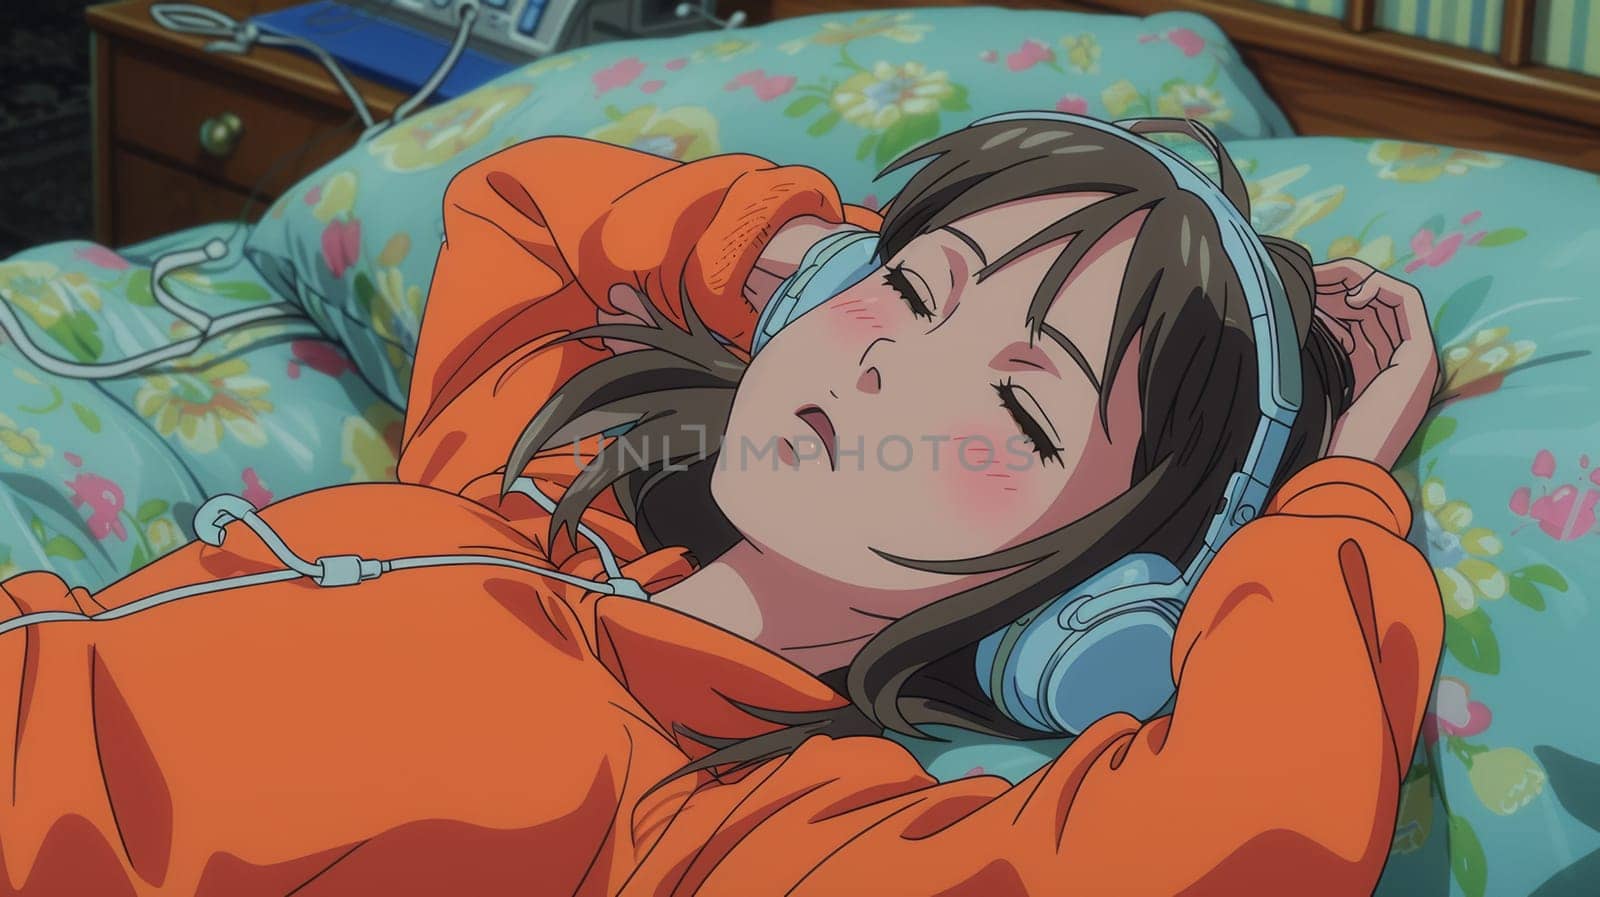 A woman laying on a bed with headphones listening to music